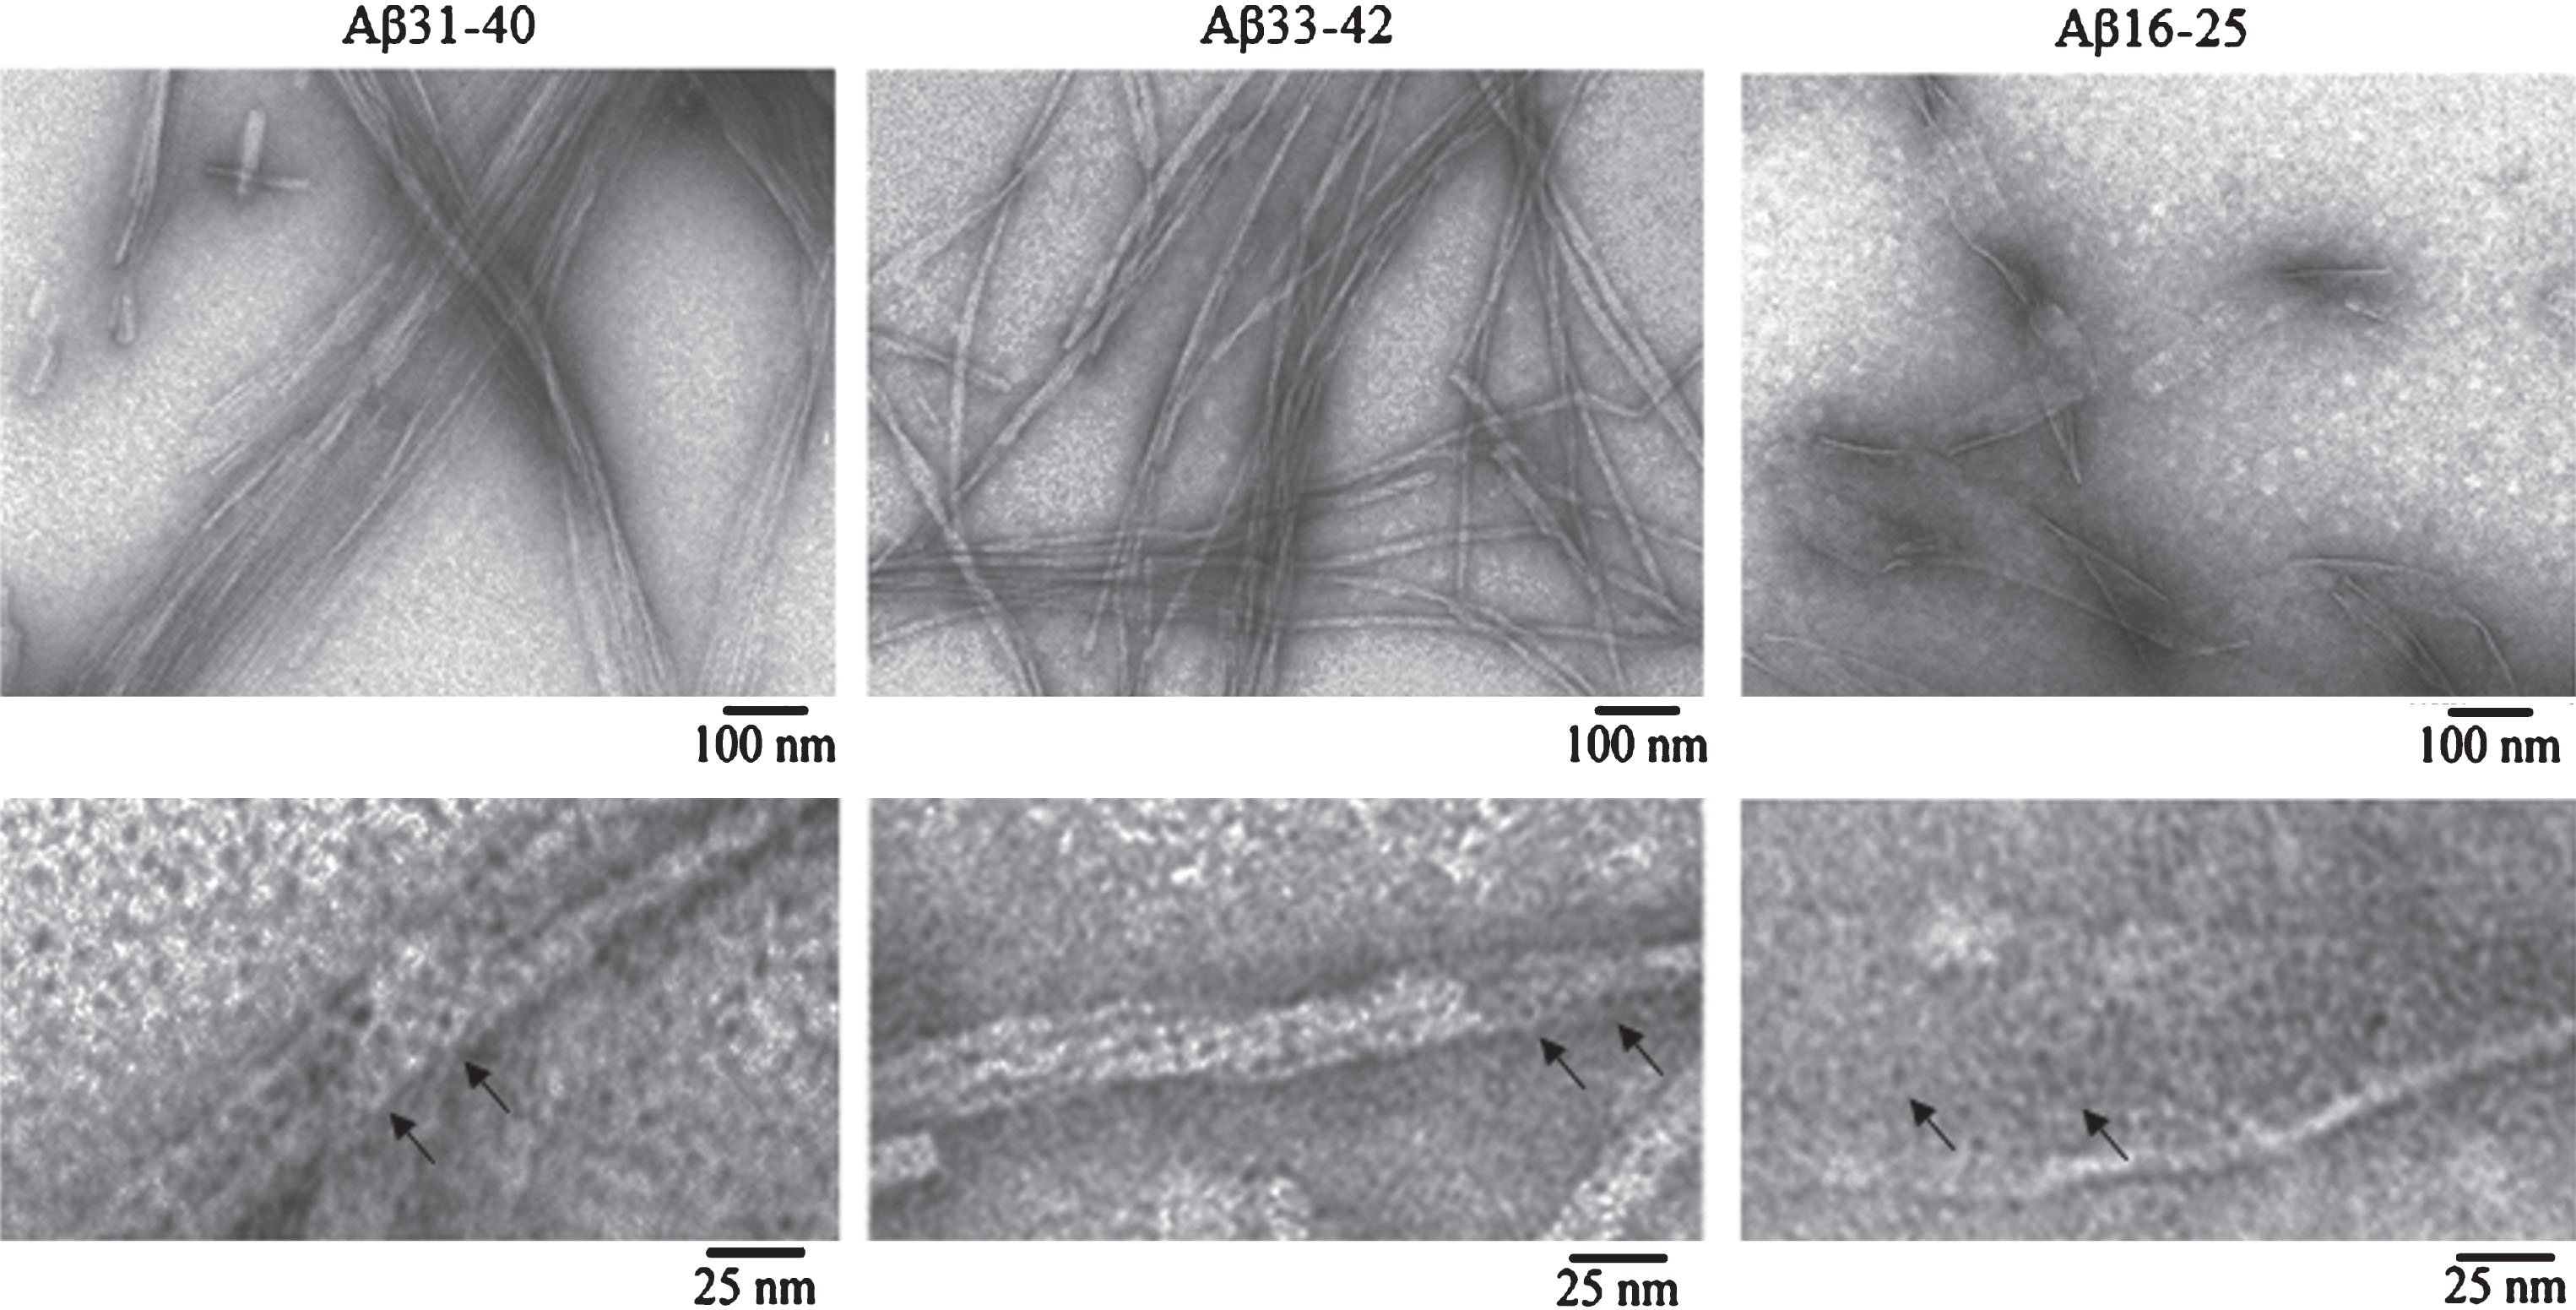 EM images of fibrils formed by Aβ42 peptide fragments. All experiments were performed at concentrations of the preparations 0.25–0.5 mg/ml in 5% DMSO, 50 mM Tris-HCl (pH 7.5) and incubation at 37°C for 24 h. The preparations were negatively stained with 1% aqueous solution of uranyl acetate. Bottom row: fragments of fields at large magnification. Arrows indicate ring-like oligomers with the outer diameter of about 6–7 nm and the inner diameter (hole) of about 2–3 nm.